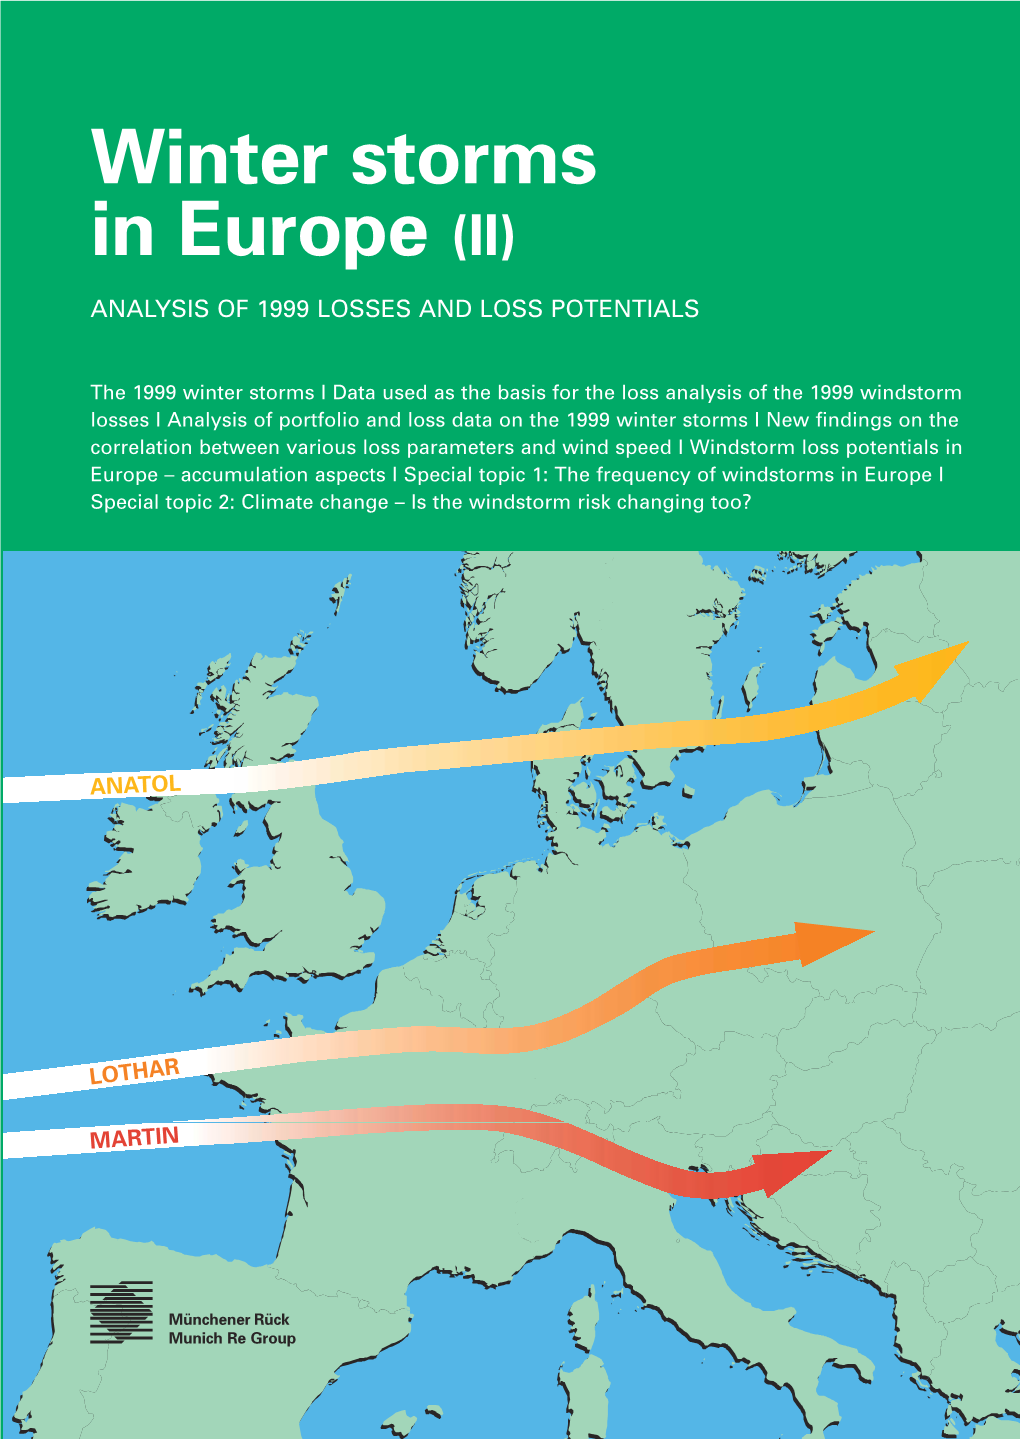 Winter Storms in Europe (II): Analysis of 1999 Losses and Loss Potentials